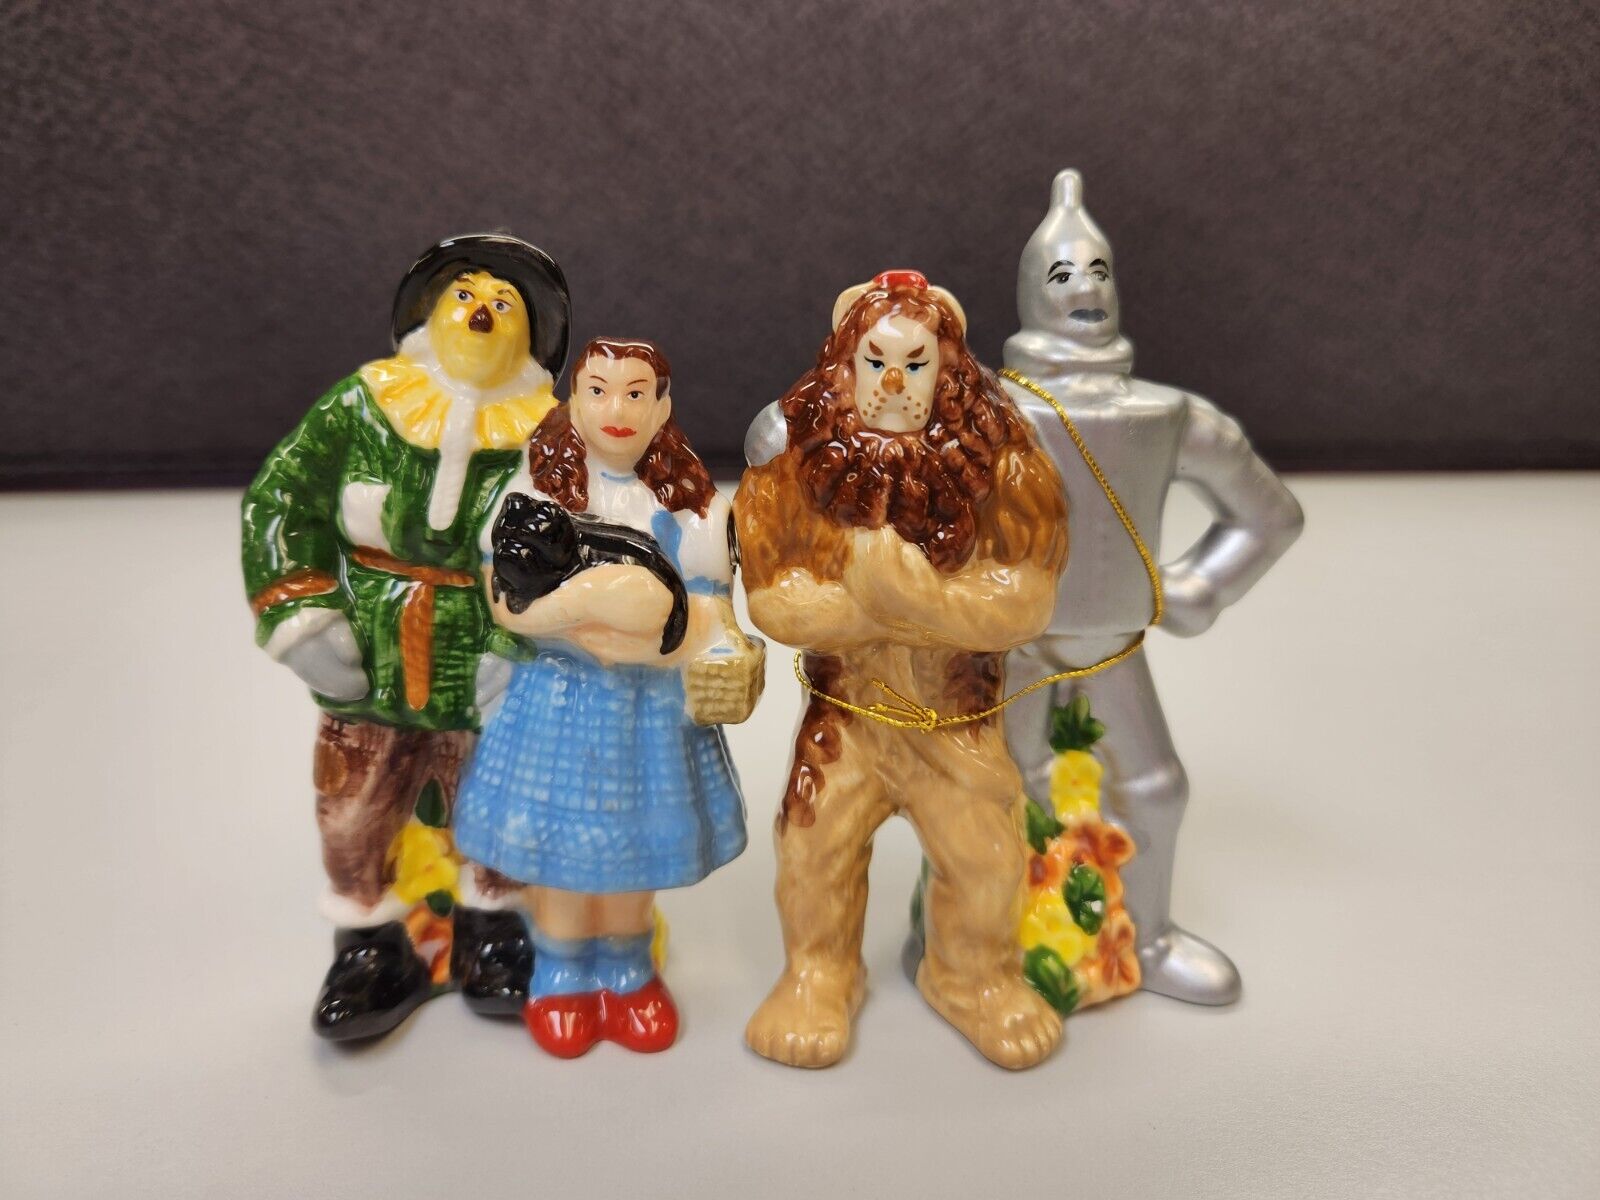 Westland Giftware Wizard of Oz Four Friends Salt & Pepper Shakers-New with tags